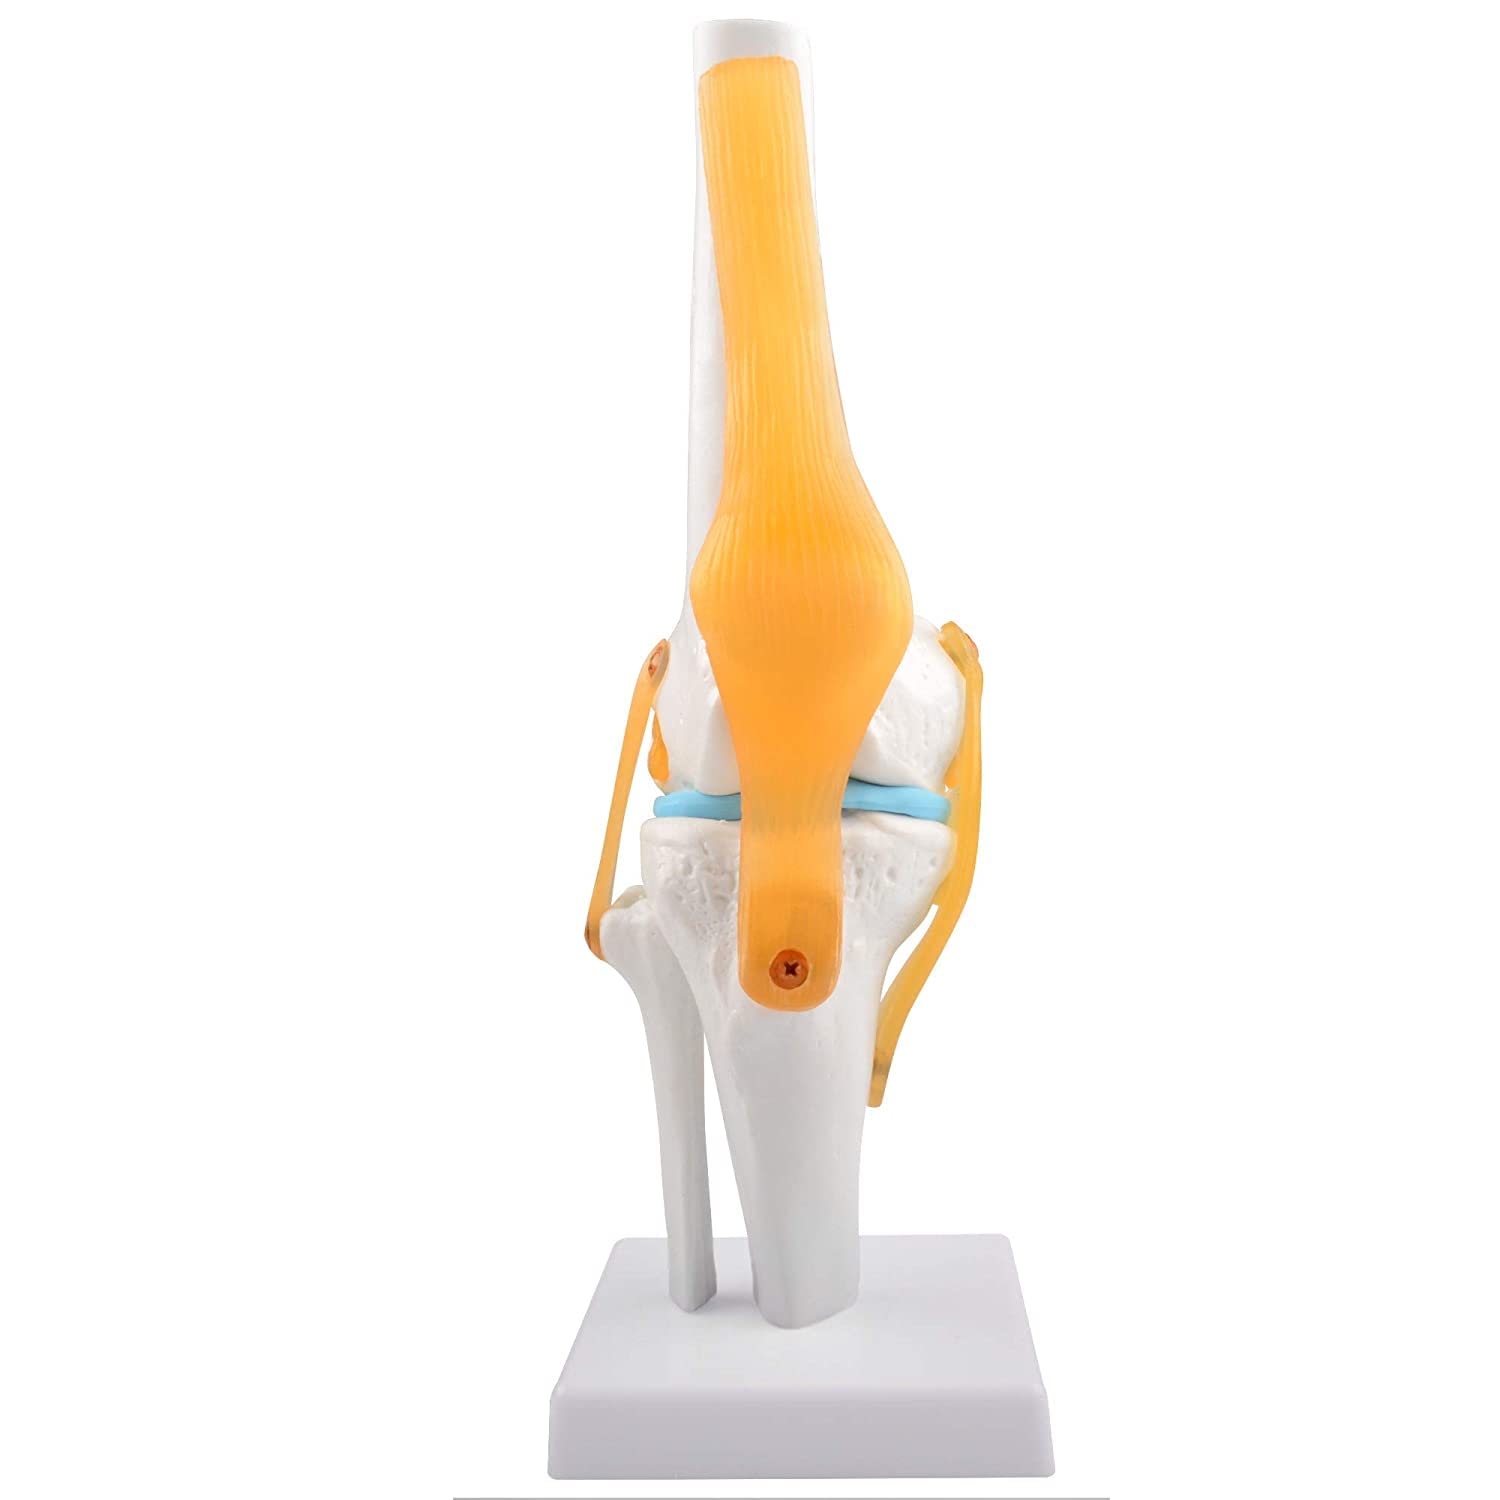  human knee joint anatomical model